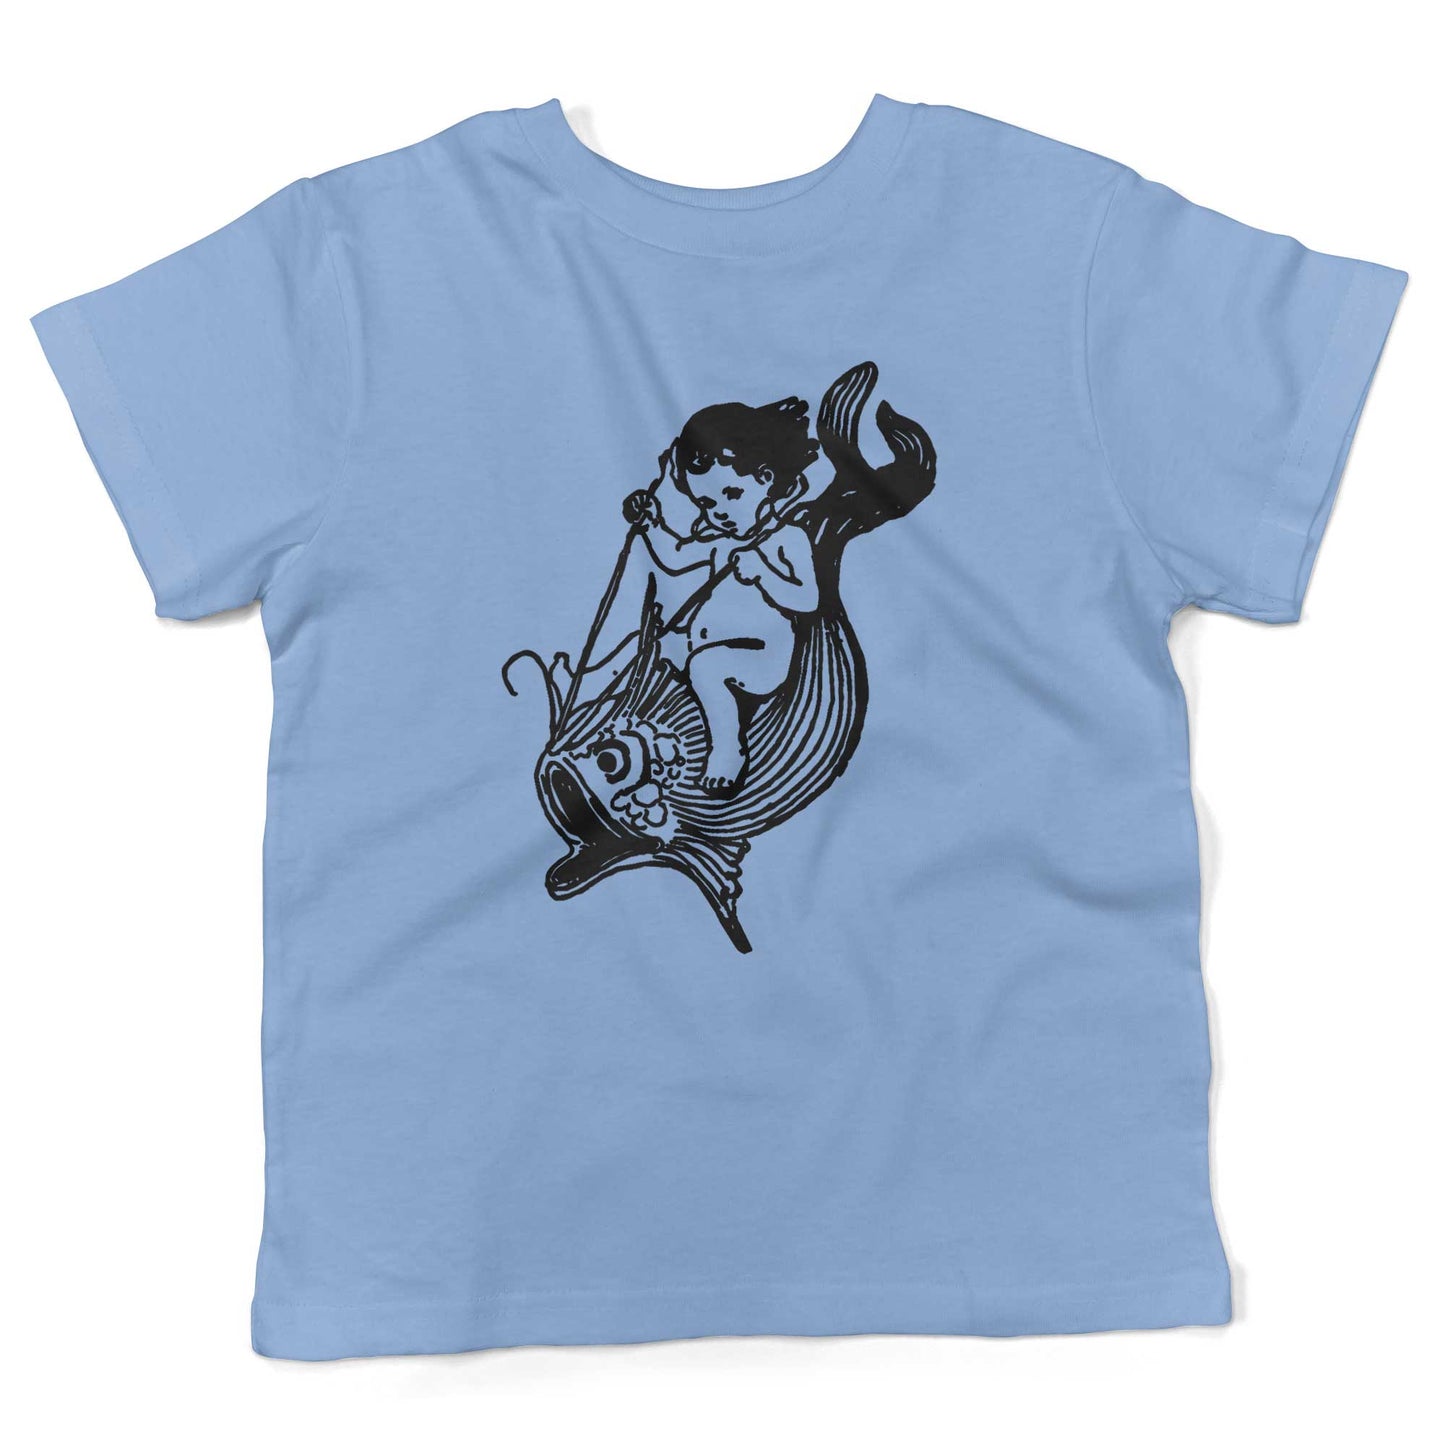 Water Baby Riding A Giant Fish Toddler Shirt-Organic Baby Blue-2T